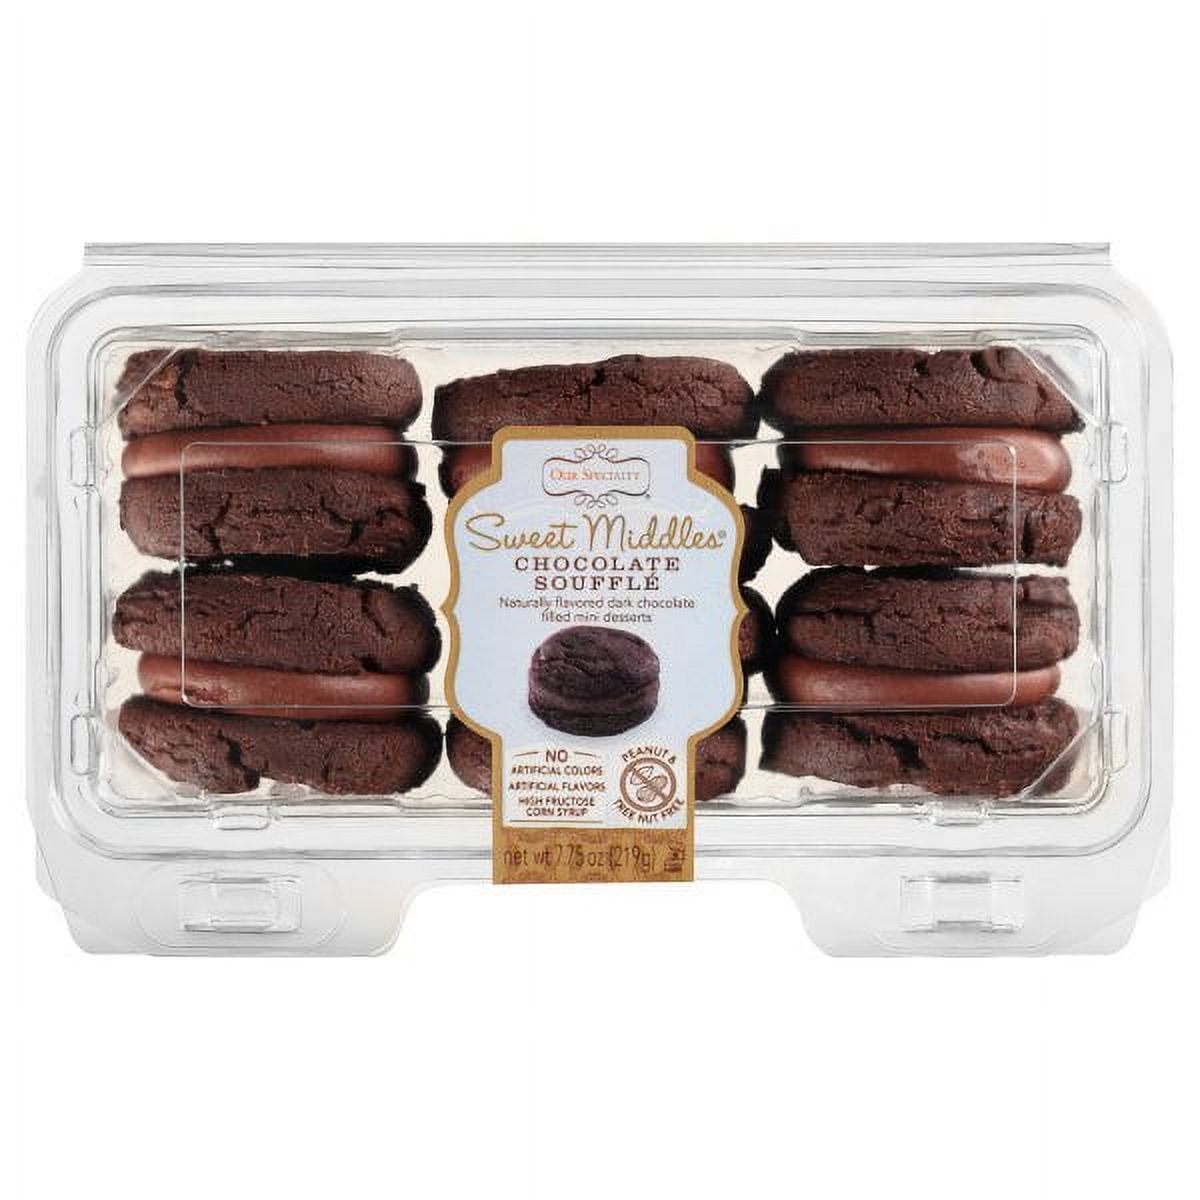 Our Specialty Treat Shop™ Chocolate Souffle Sweet Middles Baked Cookies,  Made in a Peanut Free and Nut Free Facility, 12-Pack 